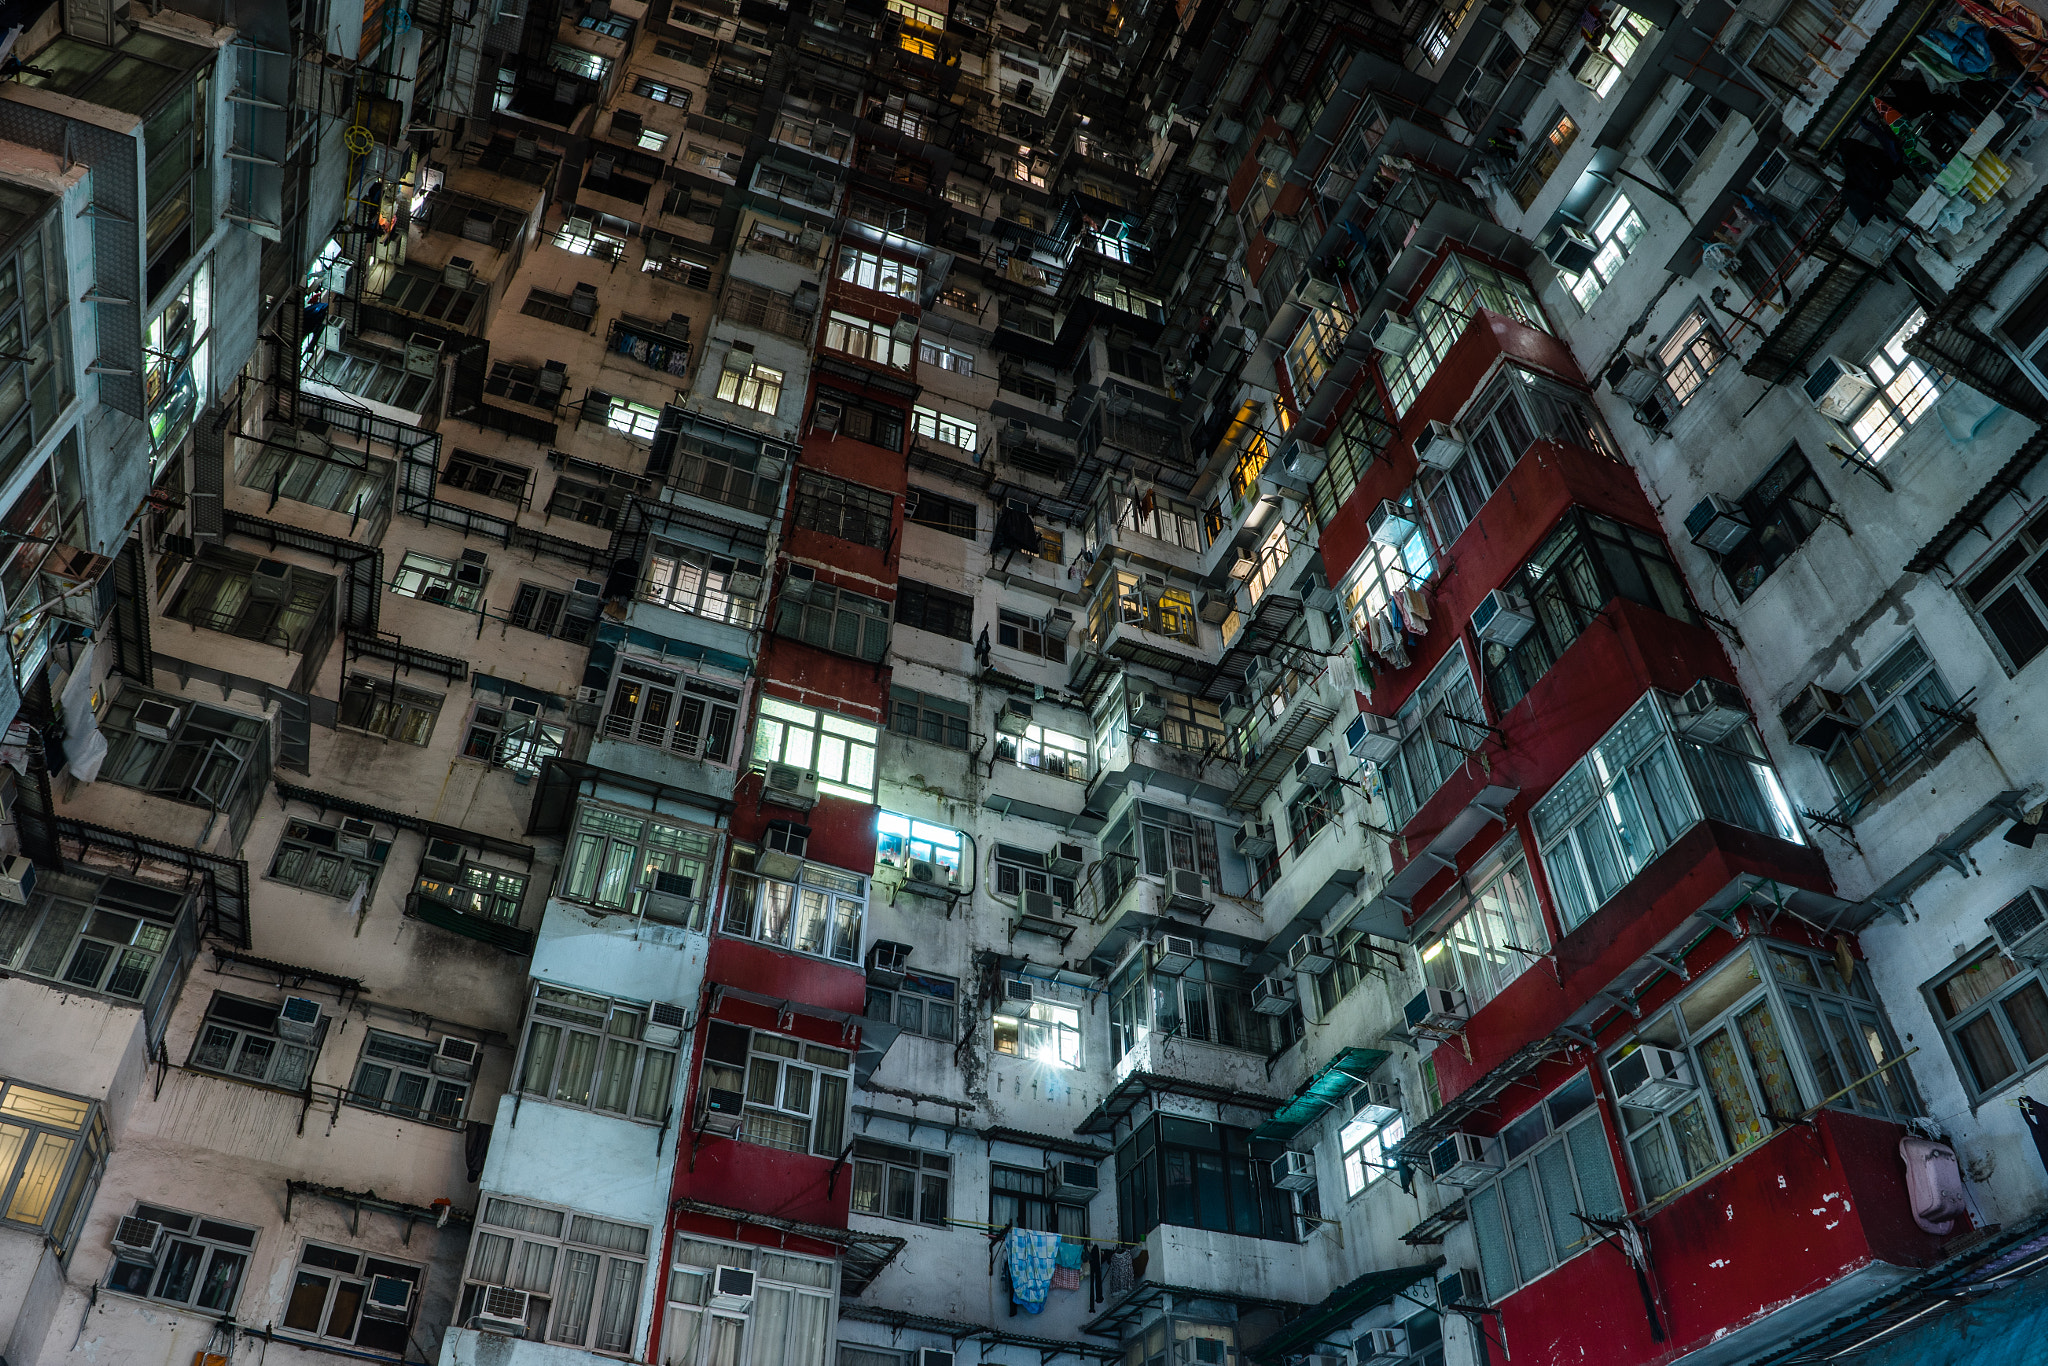 Sony a7 sample photo. Compact building in hong kong photography